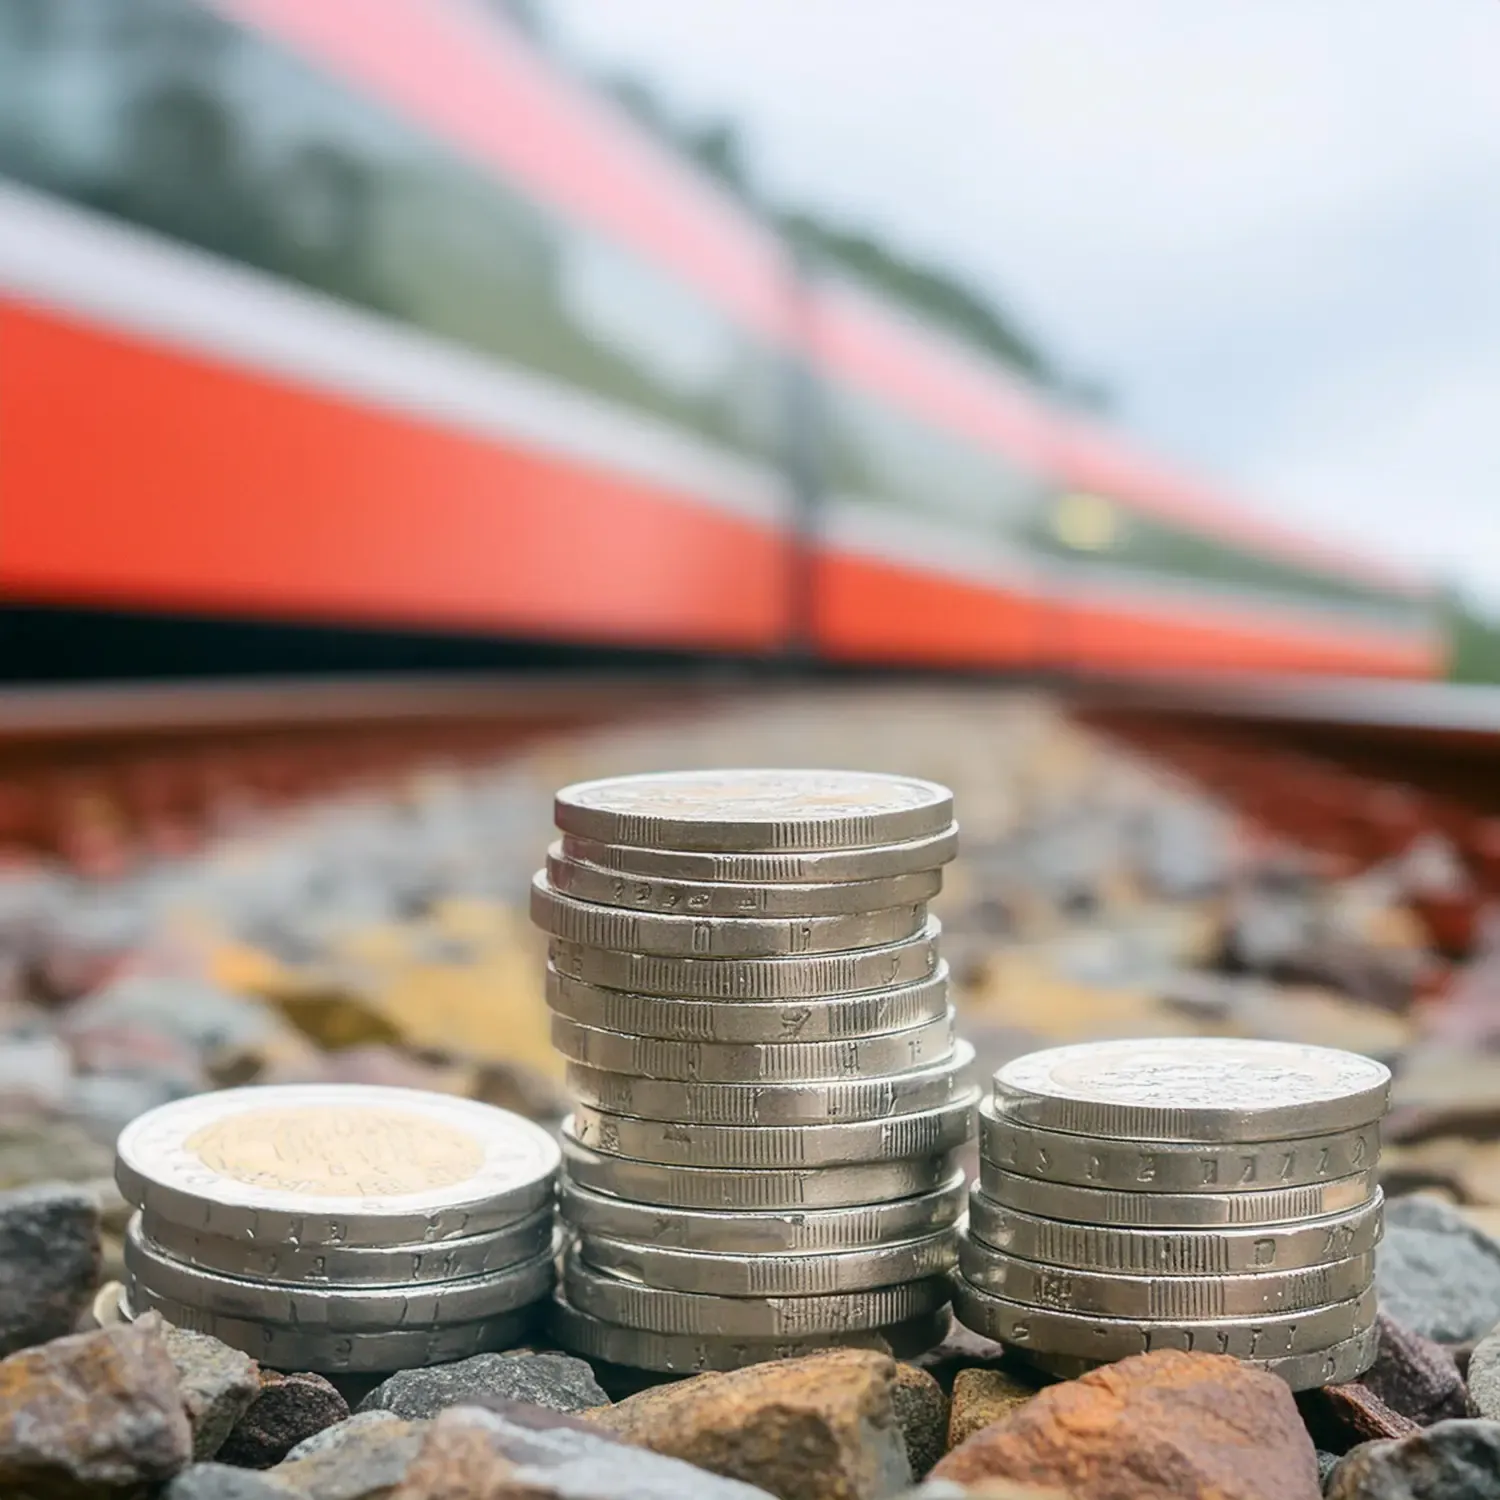 Conceptual photo of coins on the ground close to a railway